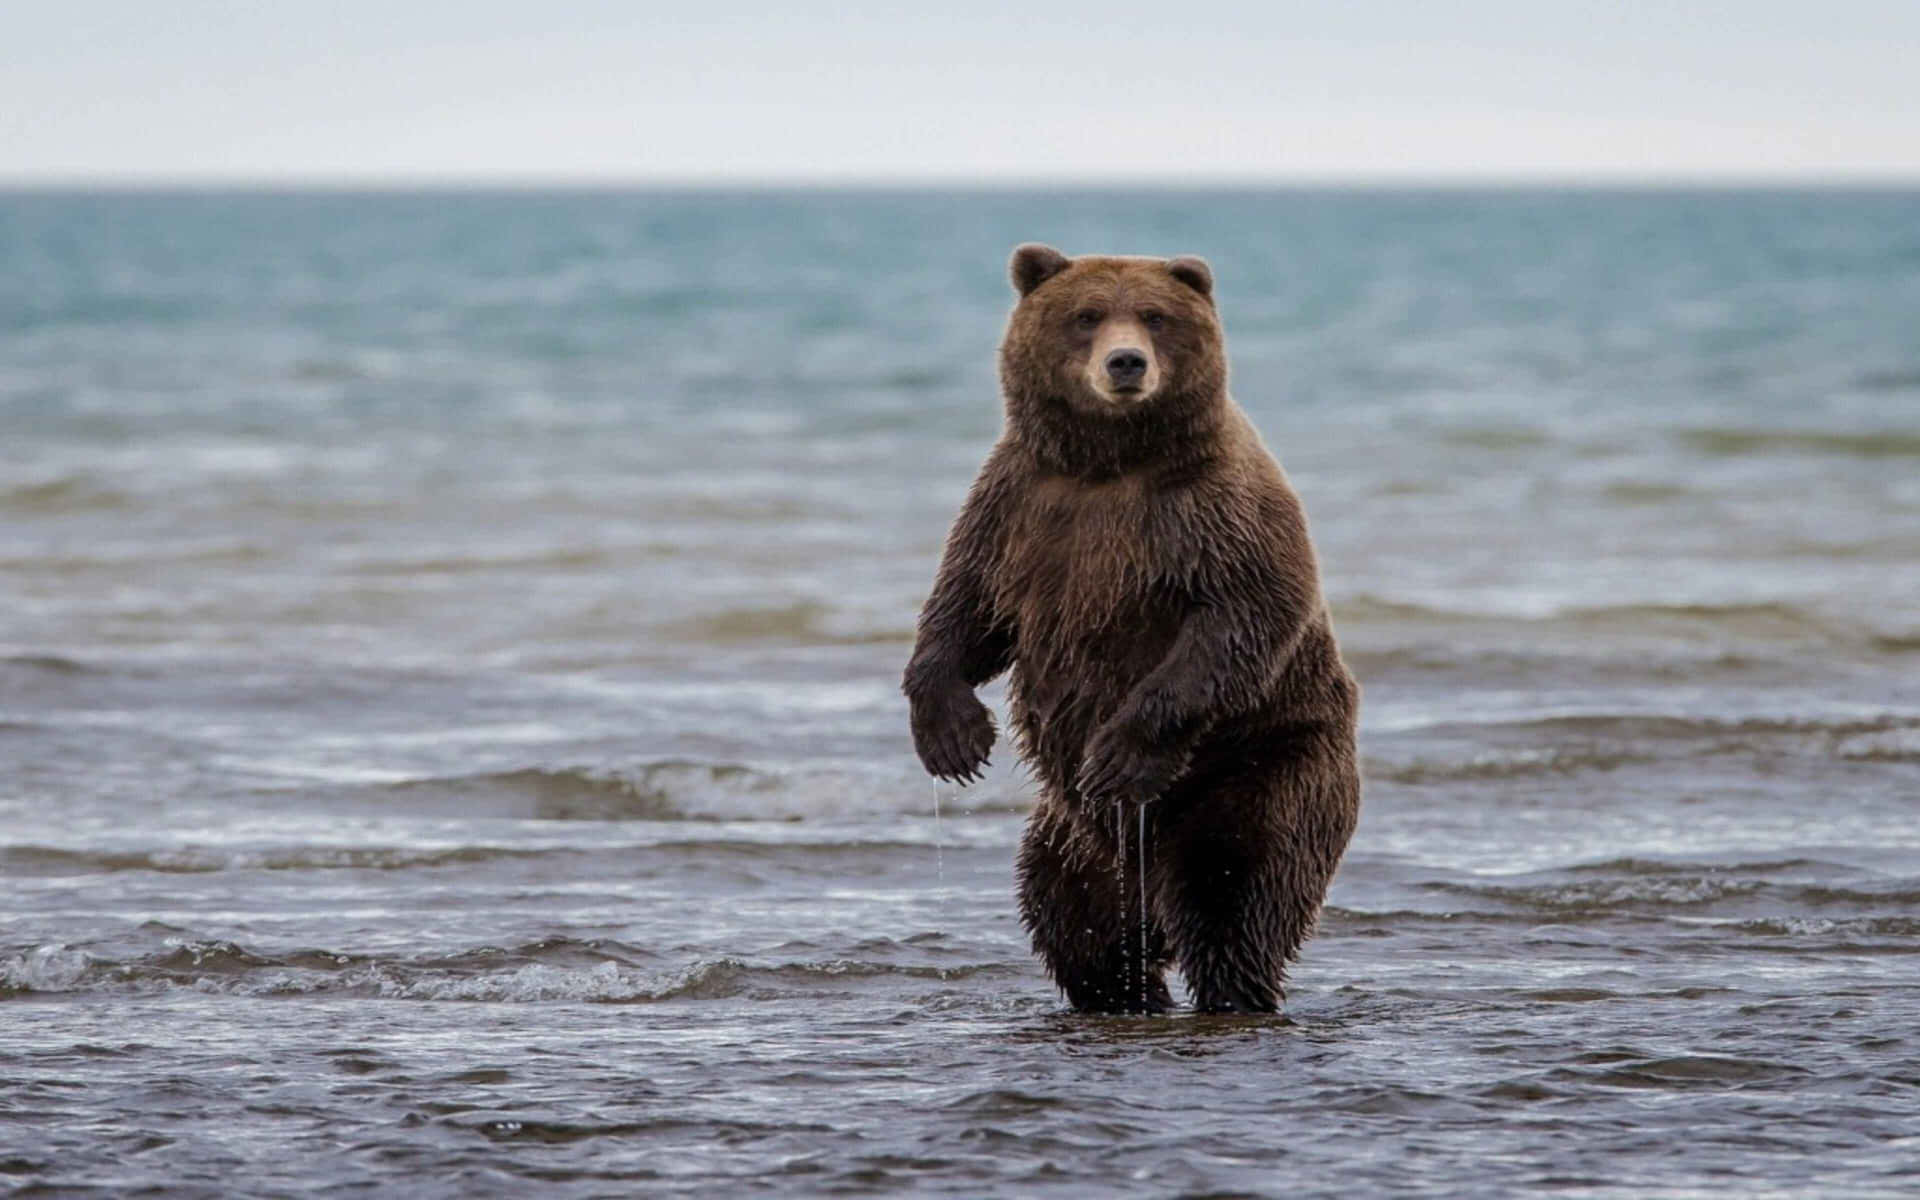 Grizzly Bear Standingin Water.jpg Background